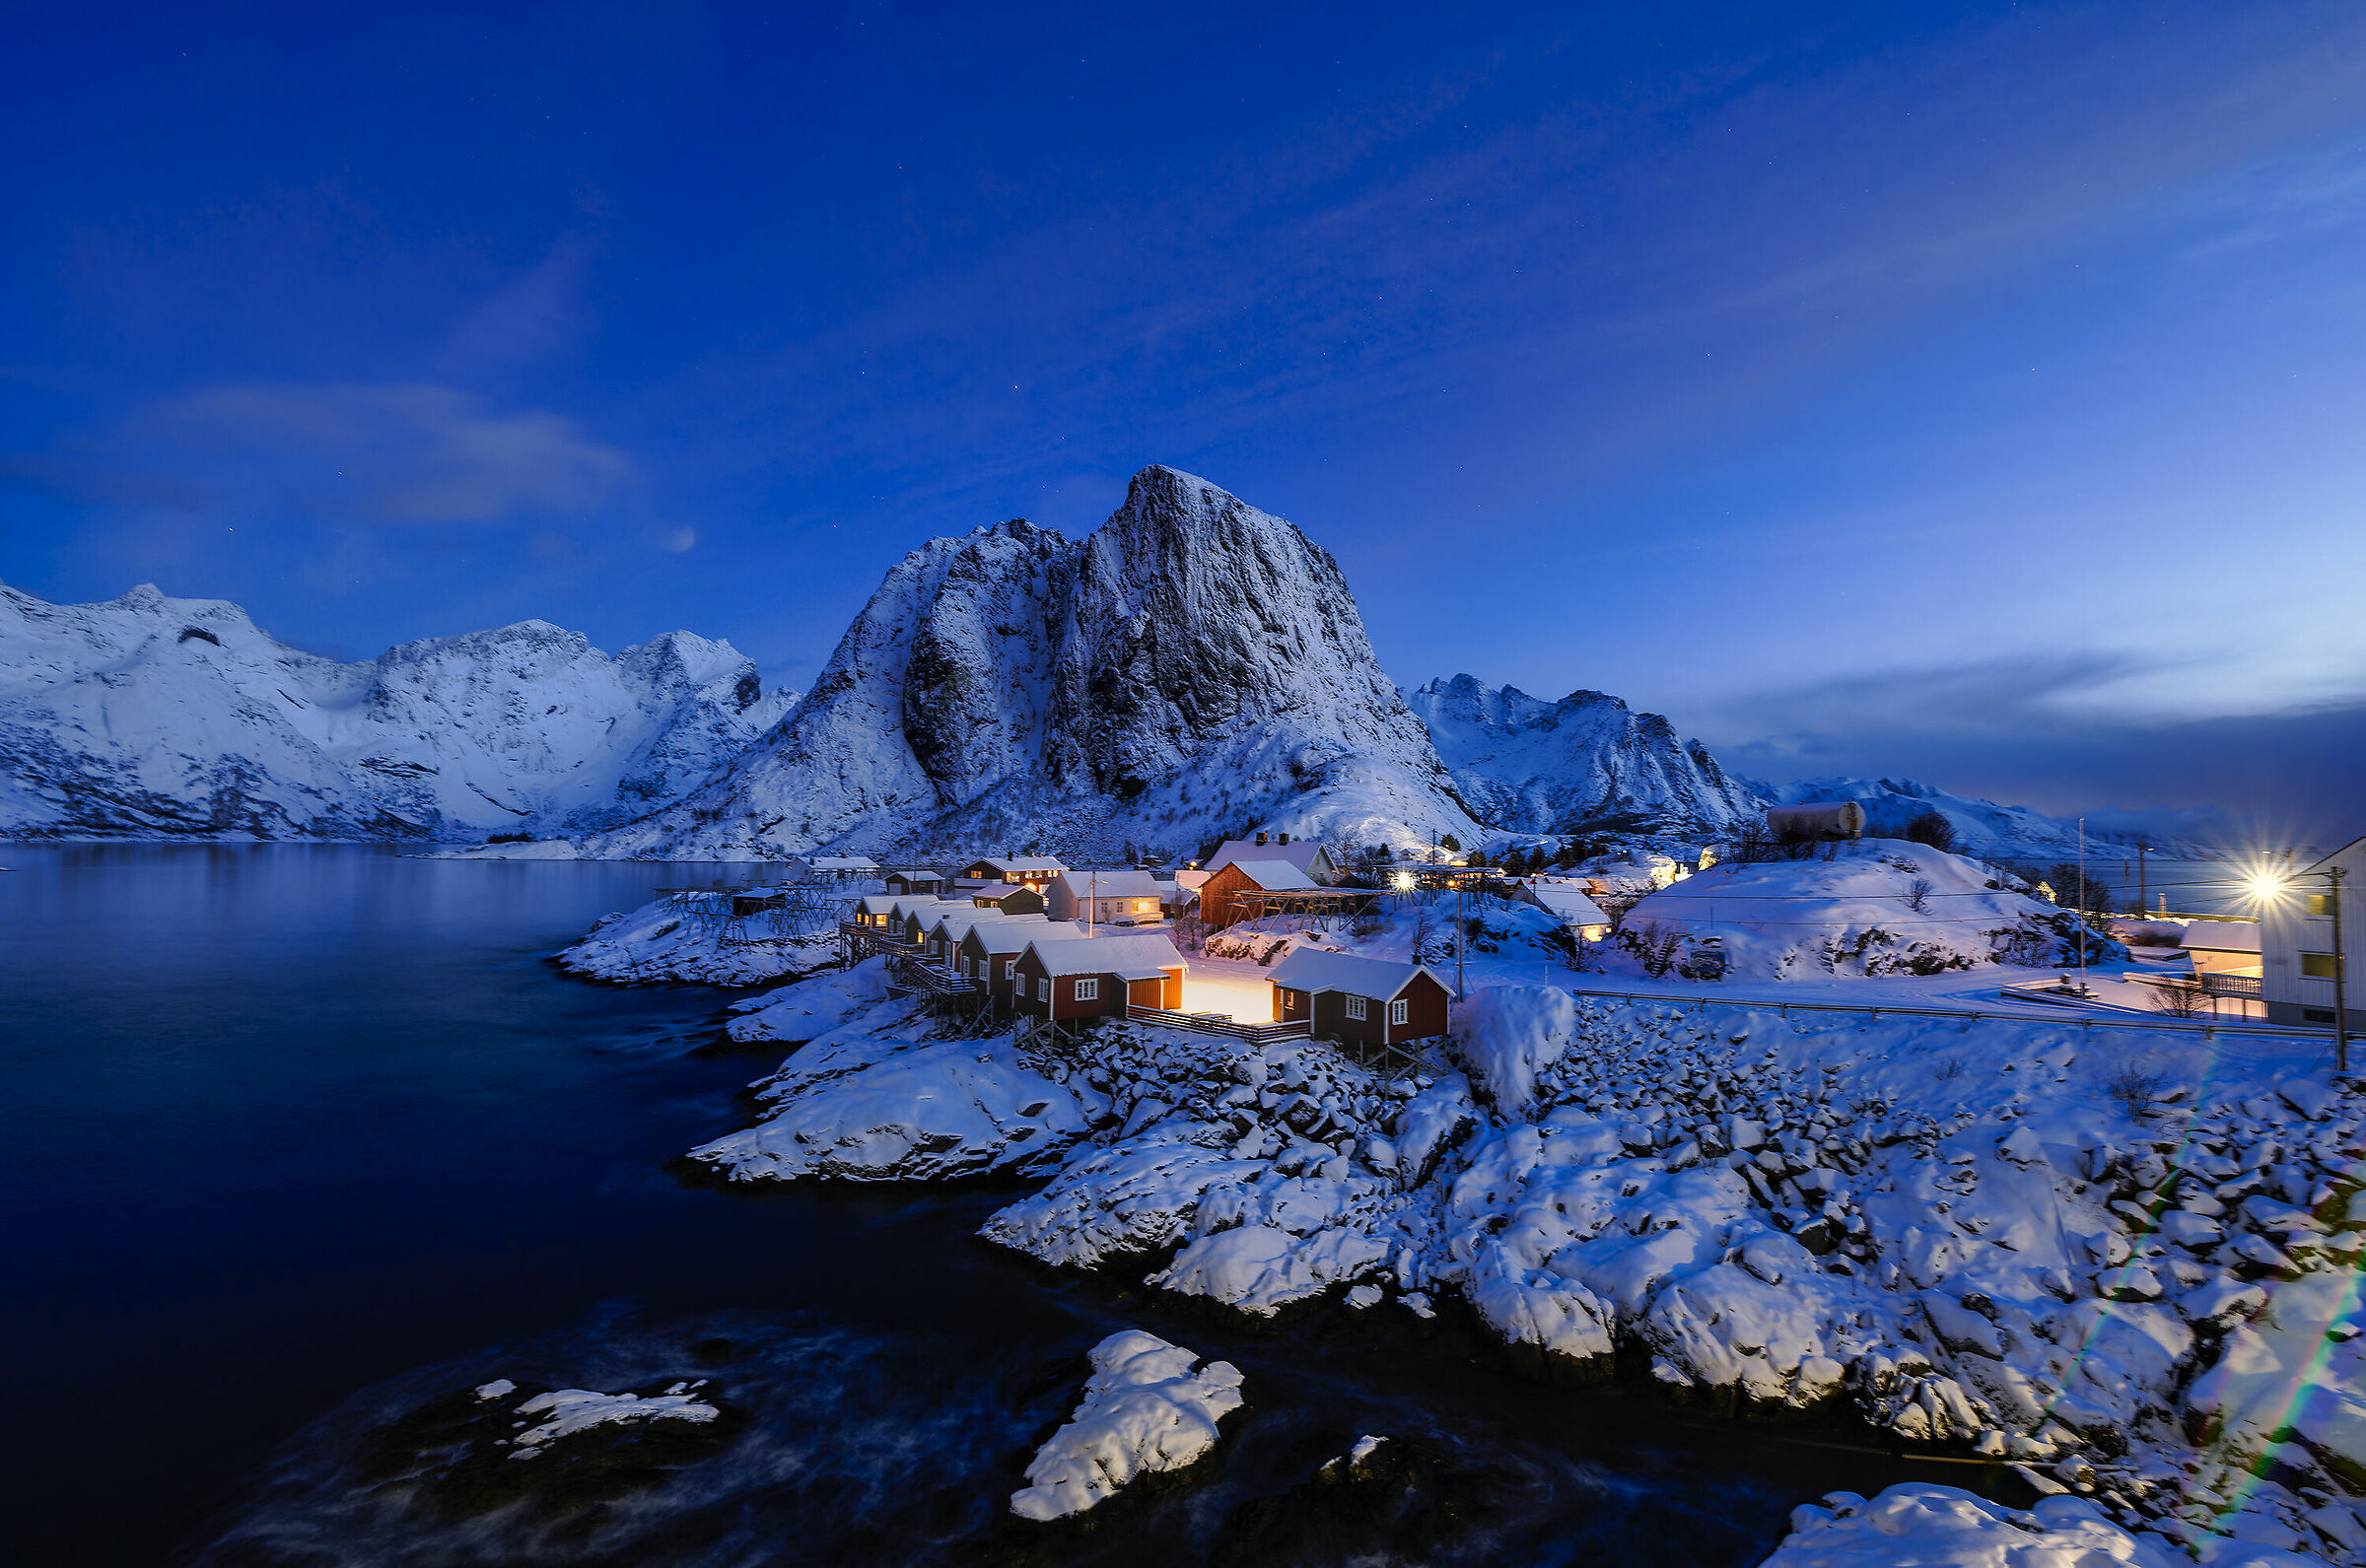 Hamnoy, we're going into the night...